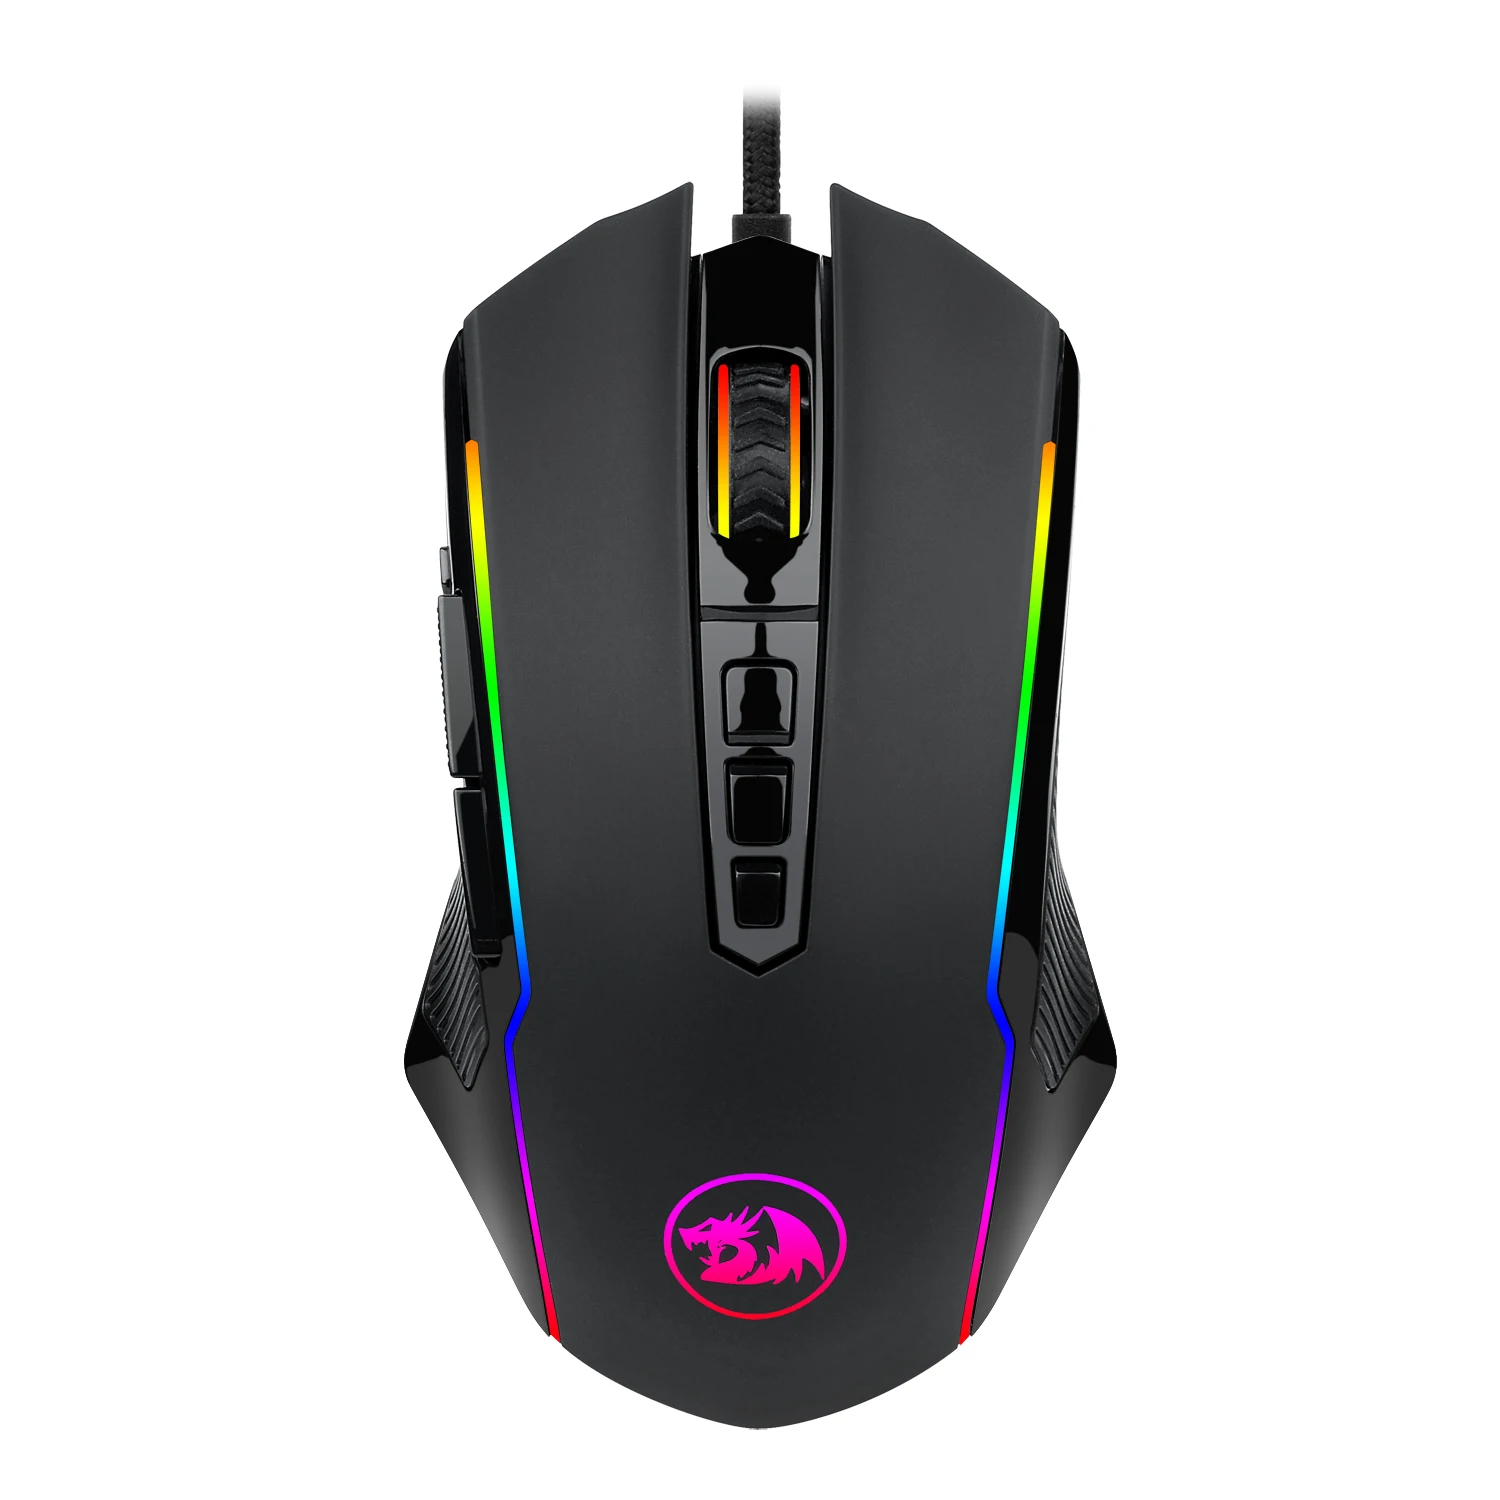 

Redragon M910 Gaming Mouse 16.8 Million RGB Color Backlit Comfortable Grip 9 Programmable Buttons12400 DPI for Game Mice